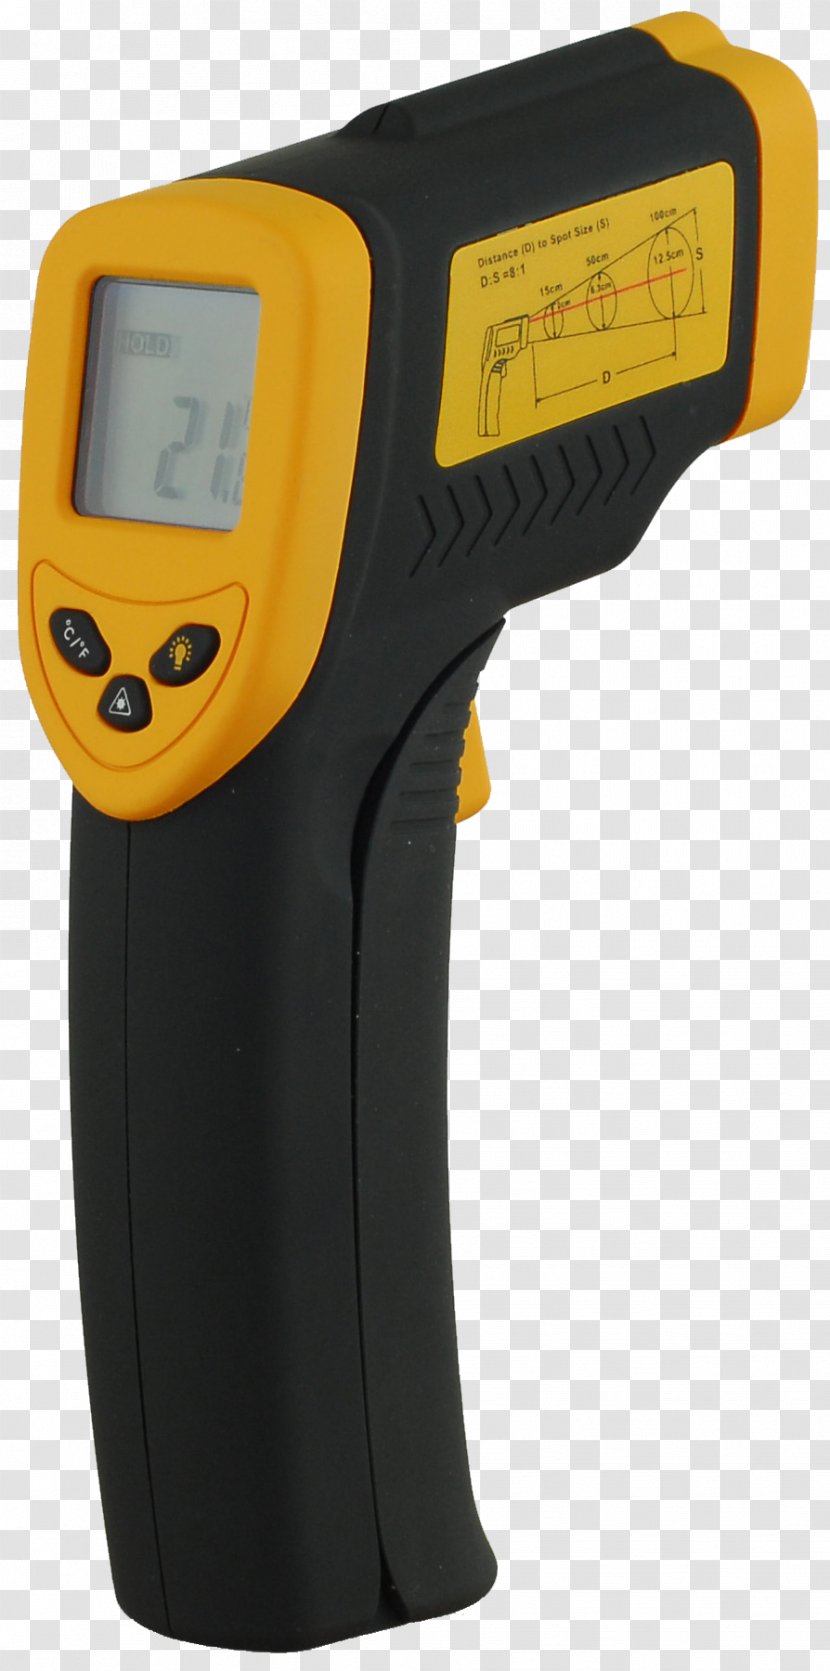 Measuring Instrument Infrared Thermometers Pyrometer - Thermometer Transparent PNG